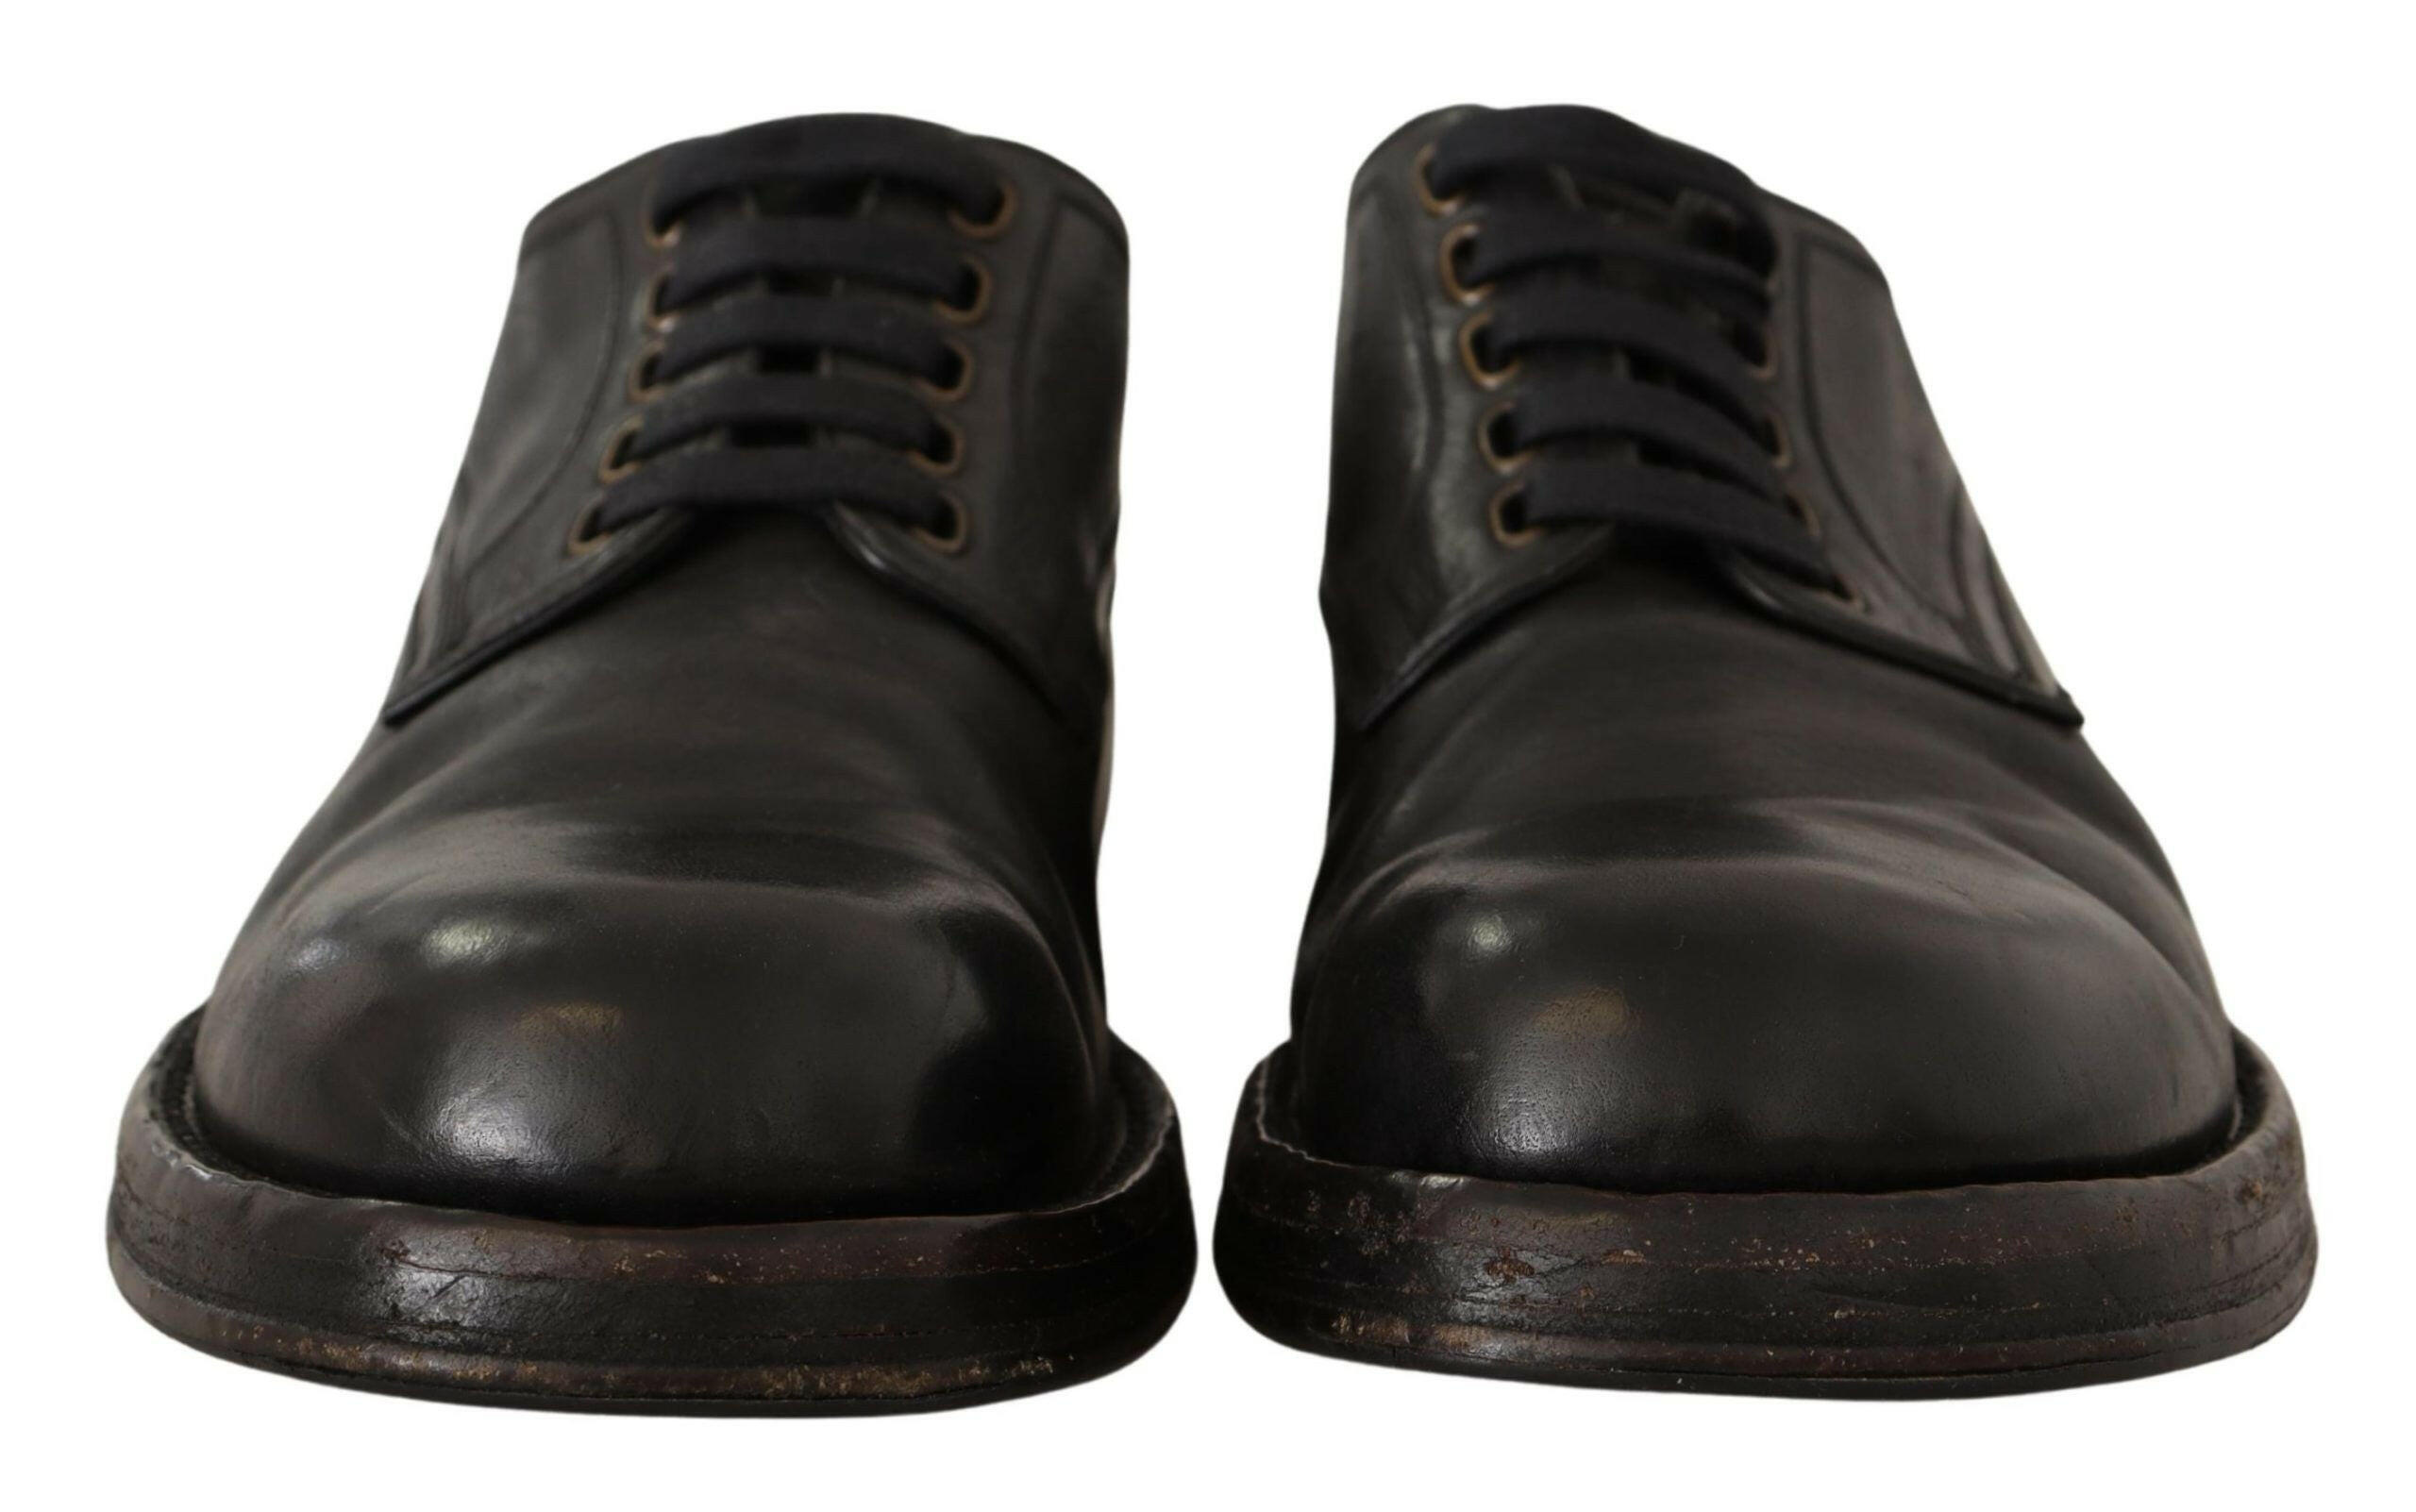 Dolce & Gabbana Black Leather Formal Lace Up Shoes - GENUINE AUTHENTIC BRAND LLC  